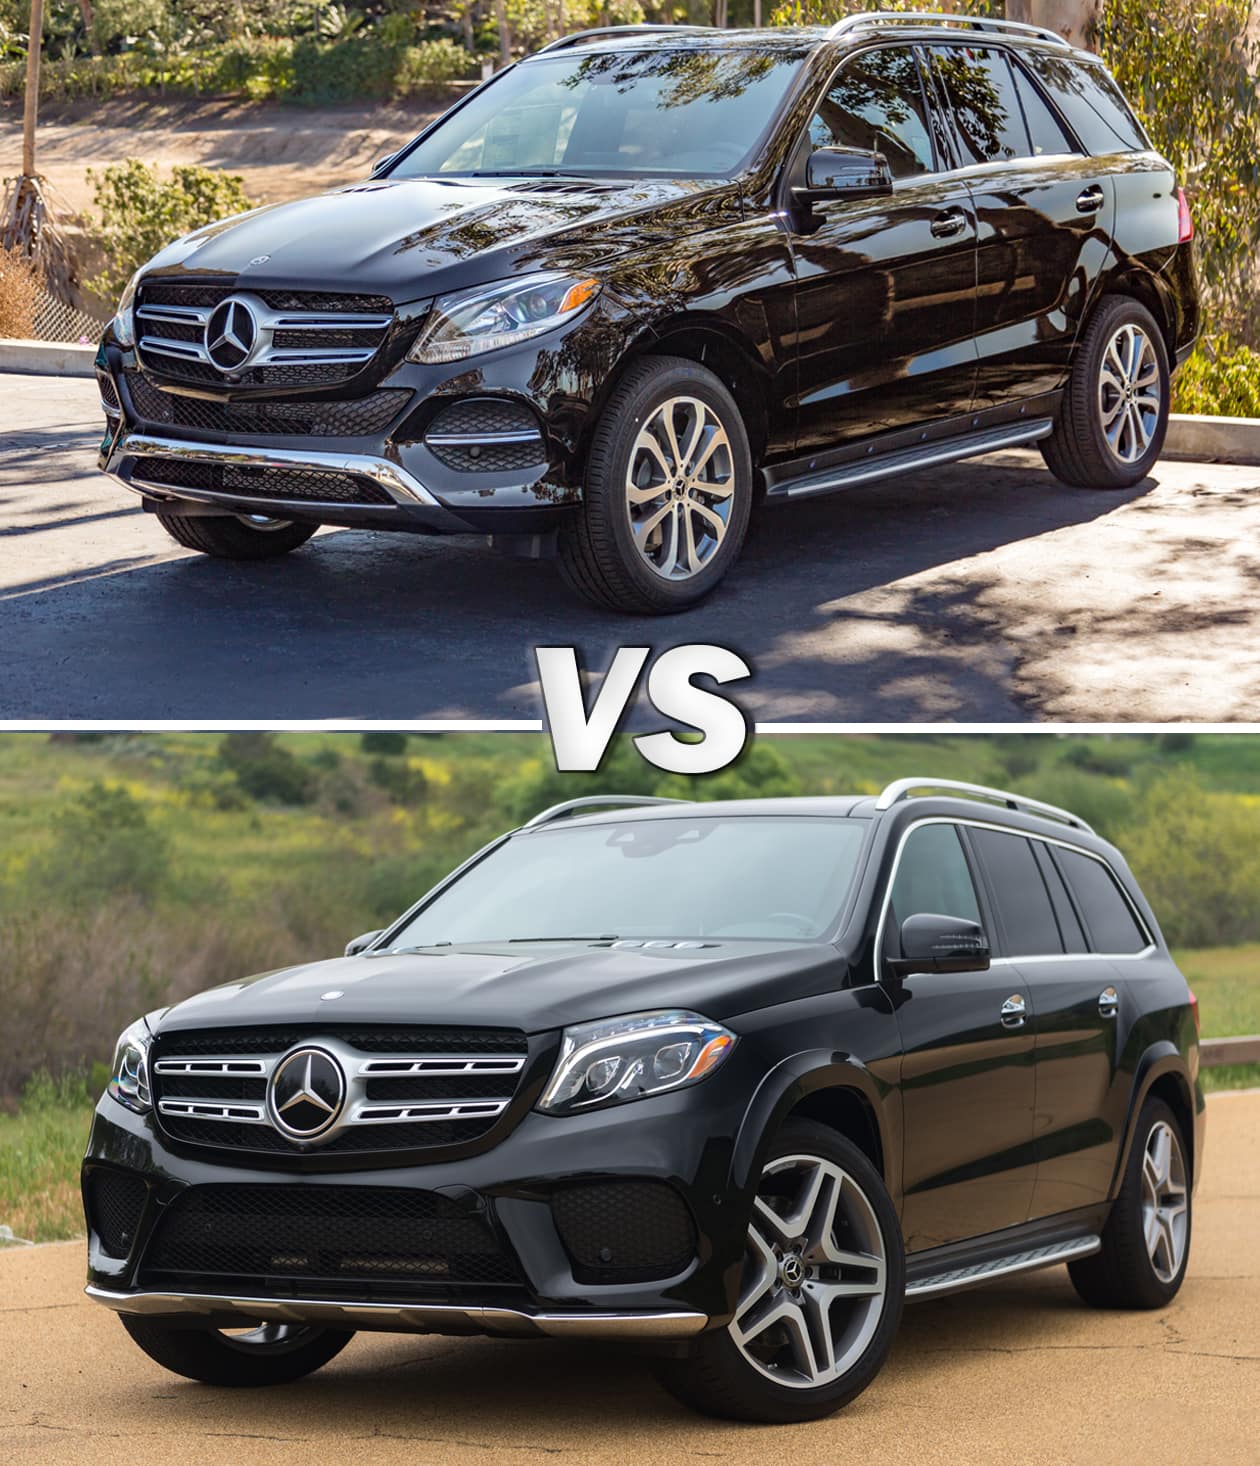 M-Class vs. GL-Class: What's the Difference? | Fletcher Jones Imports